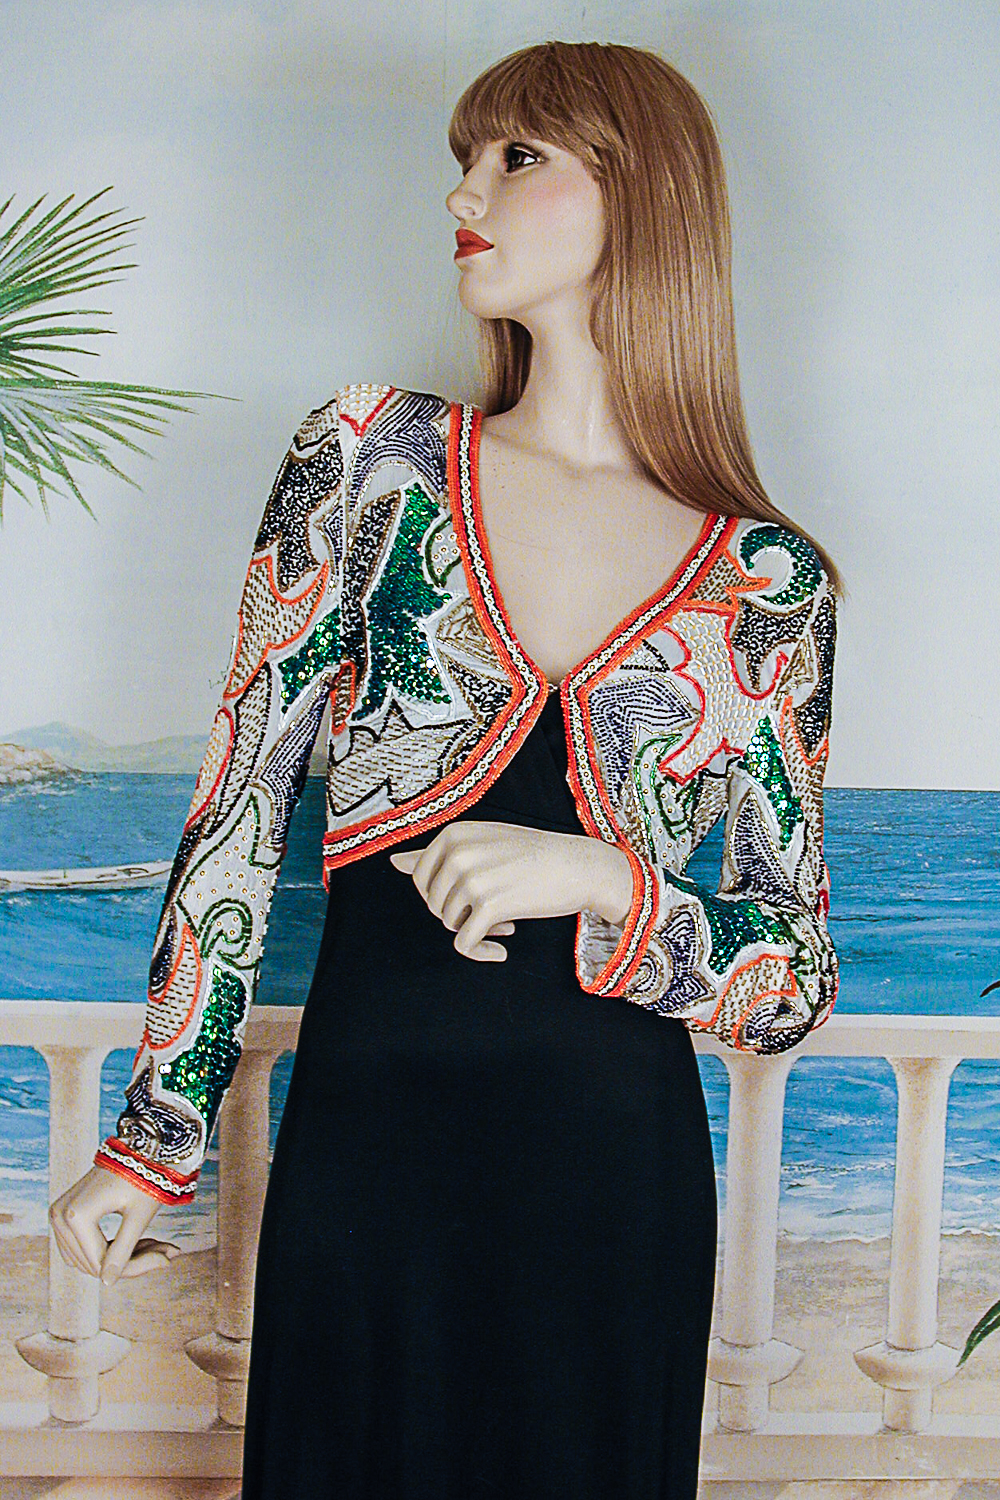 Beaded and Sequined Multi Color Bolero Jacket, a fashion accessorie - Evening Elegance